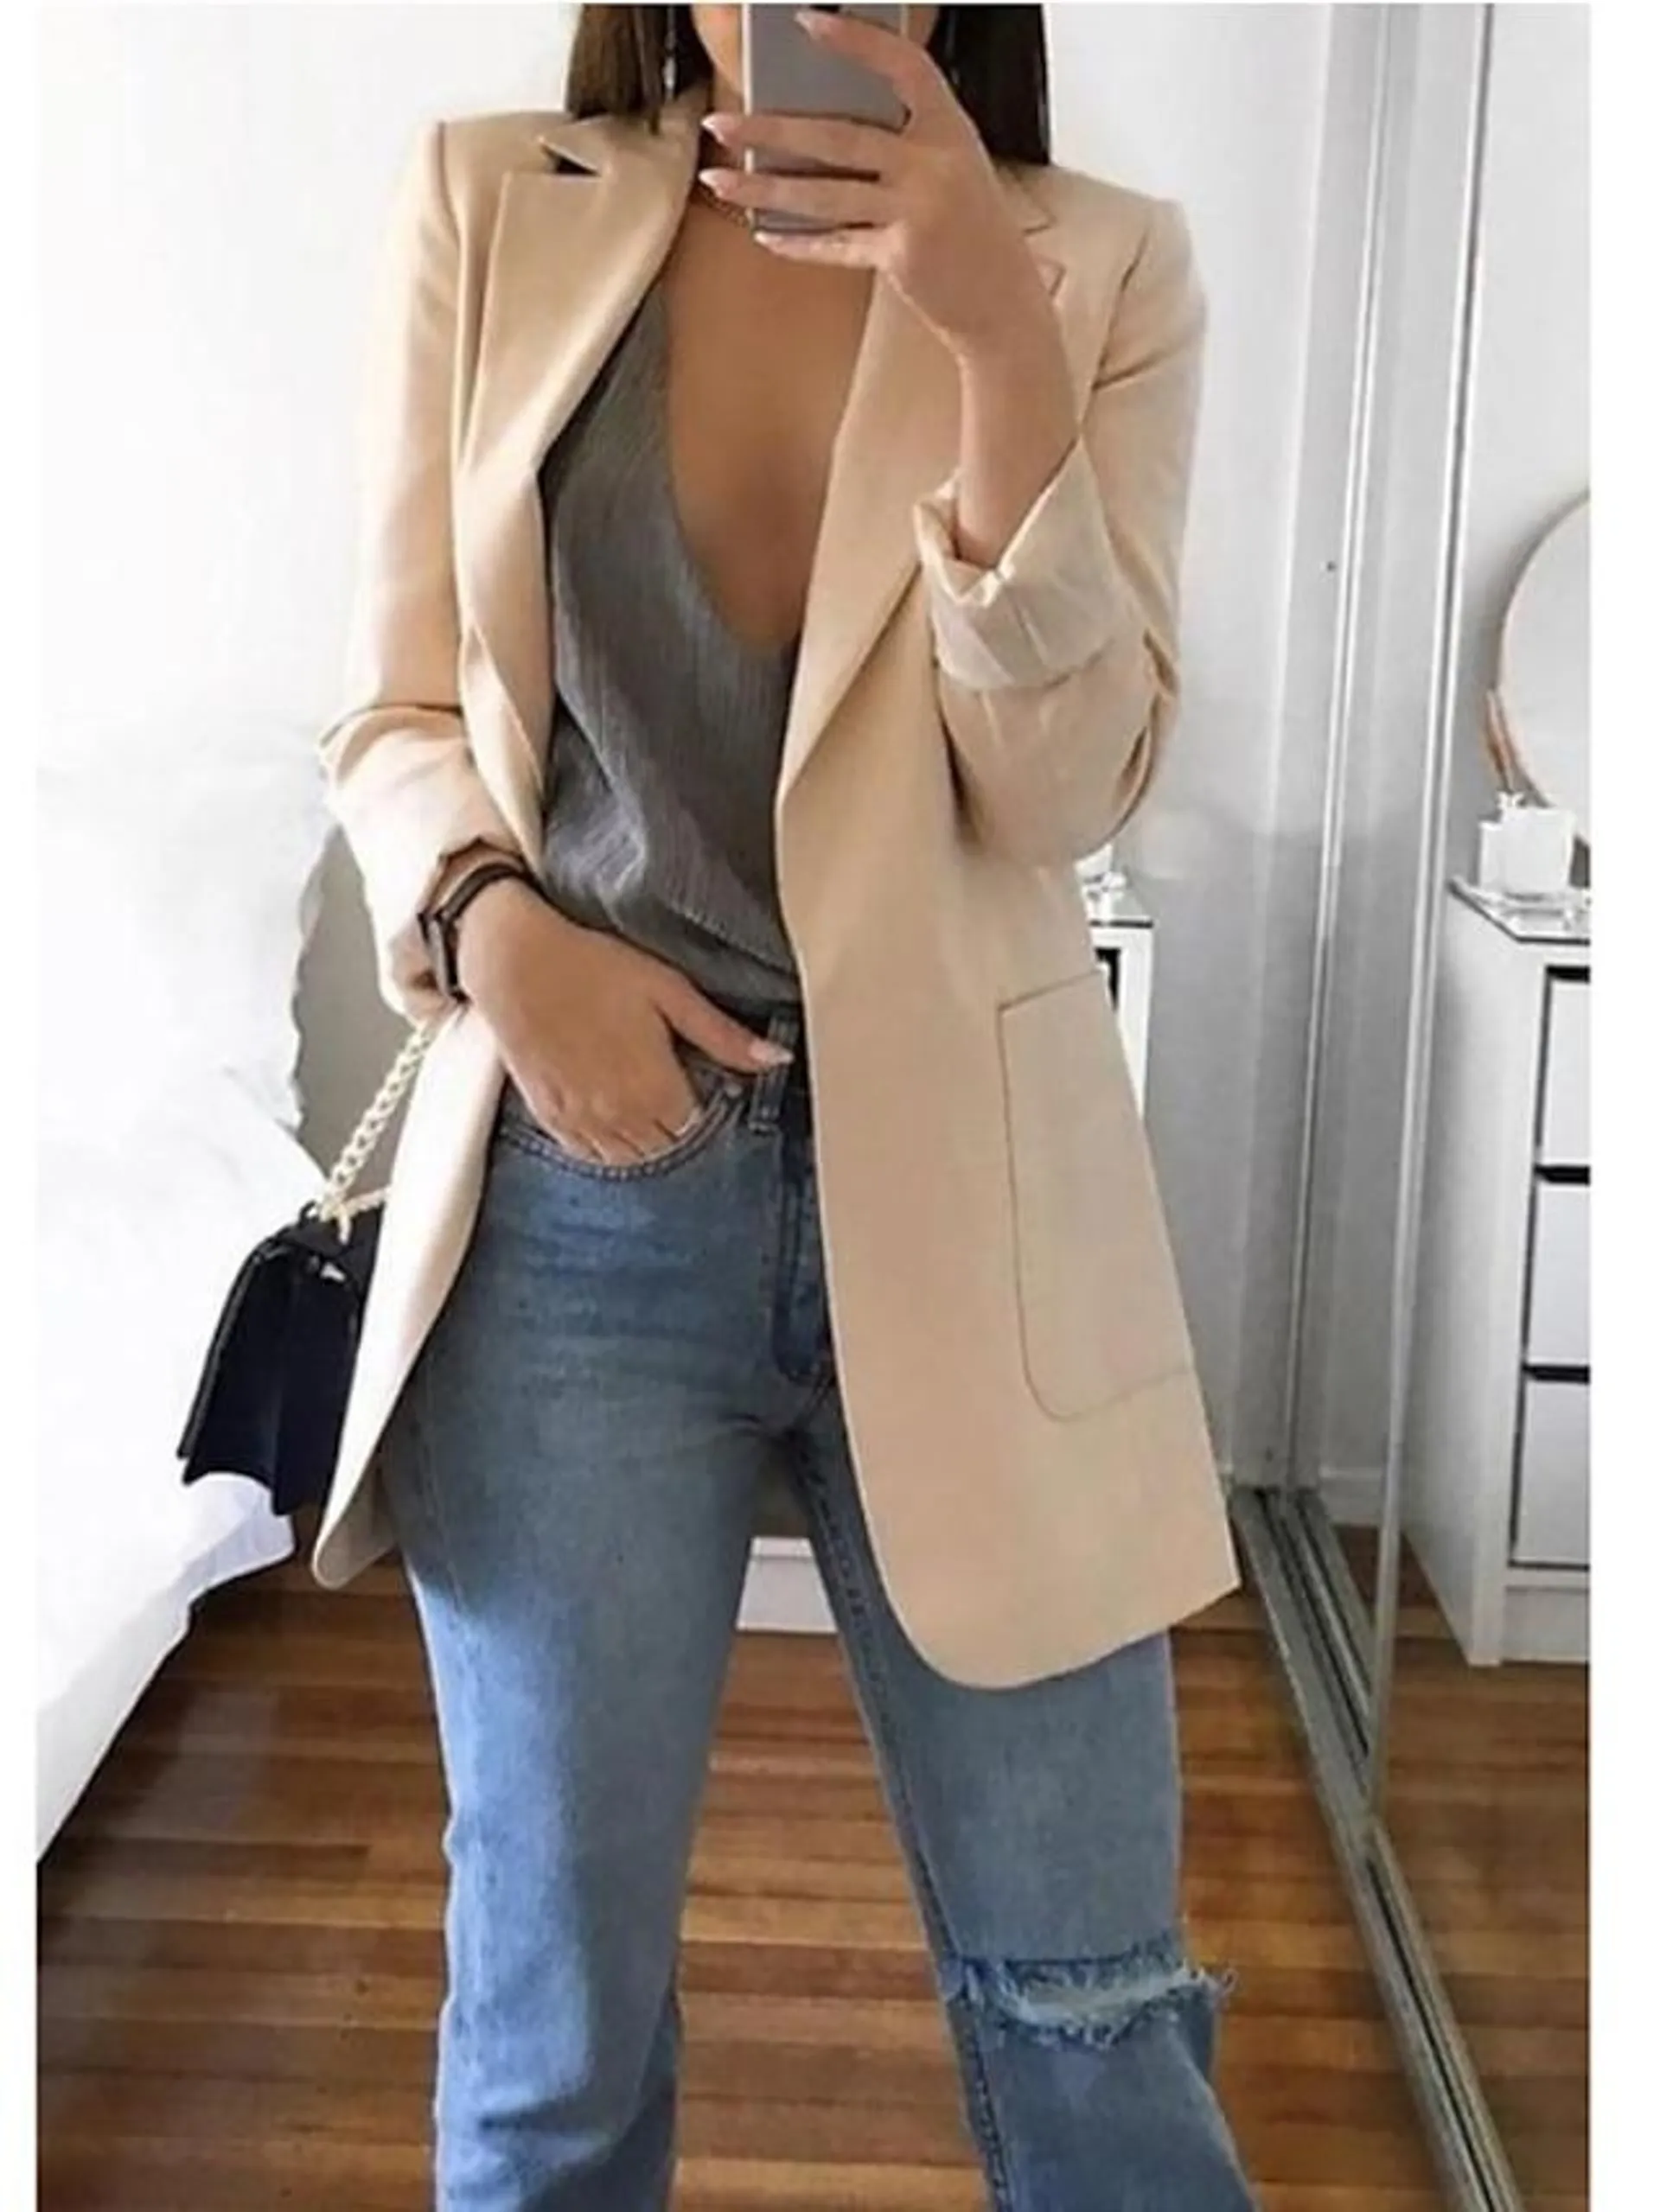 Women's Blazer Casual Jacket Fashion Casual Pocket Formal Outdoor Daily Wear Polyester Coat Spring Wine Green Black Open Front V Neck Regular Fit S M L XL XXL 3XL / Solid Color